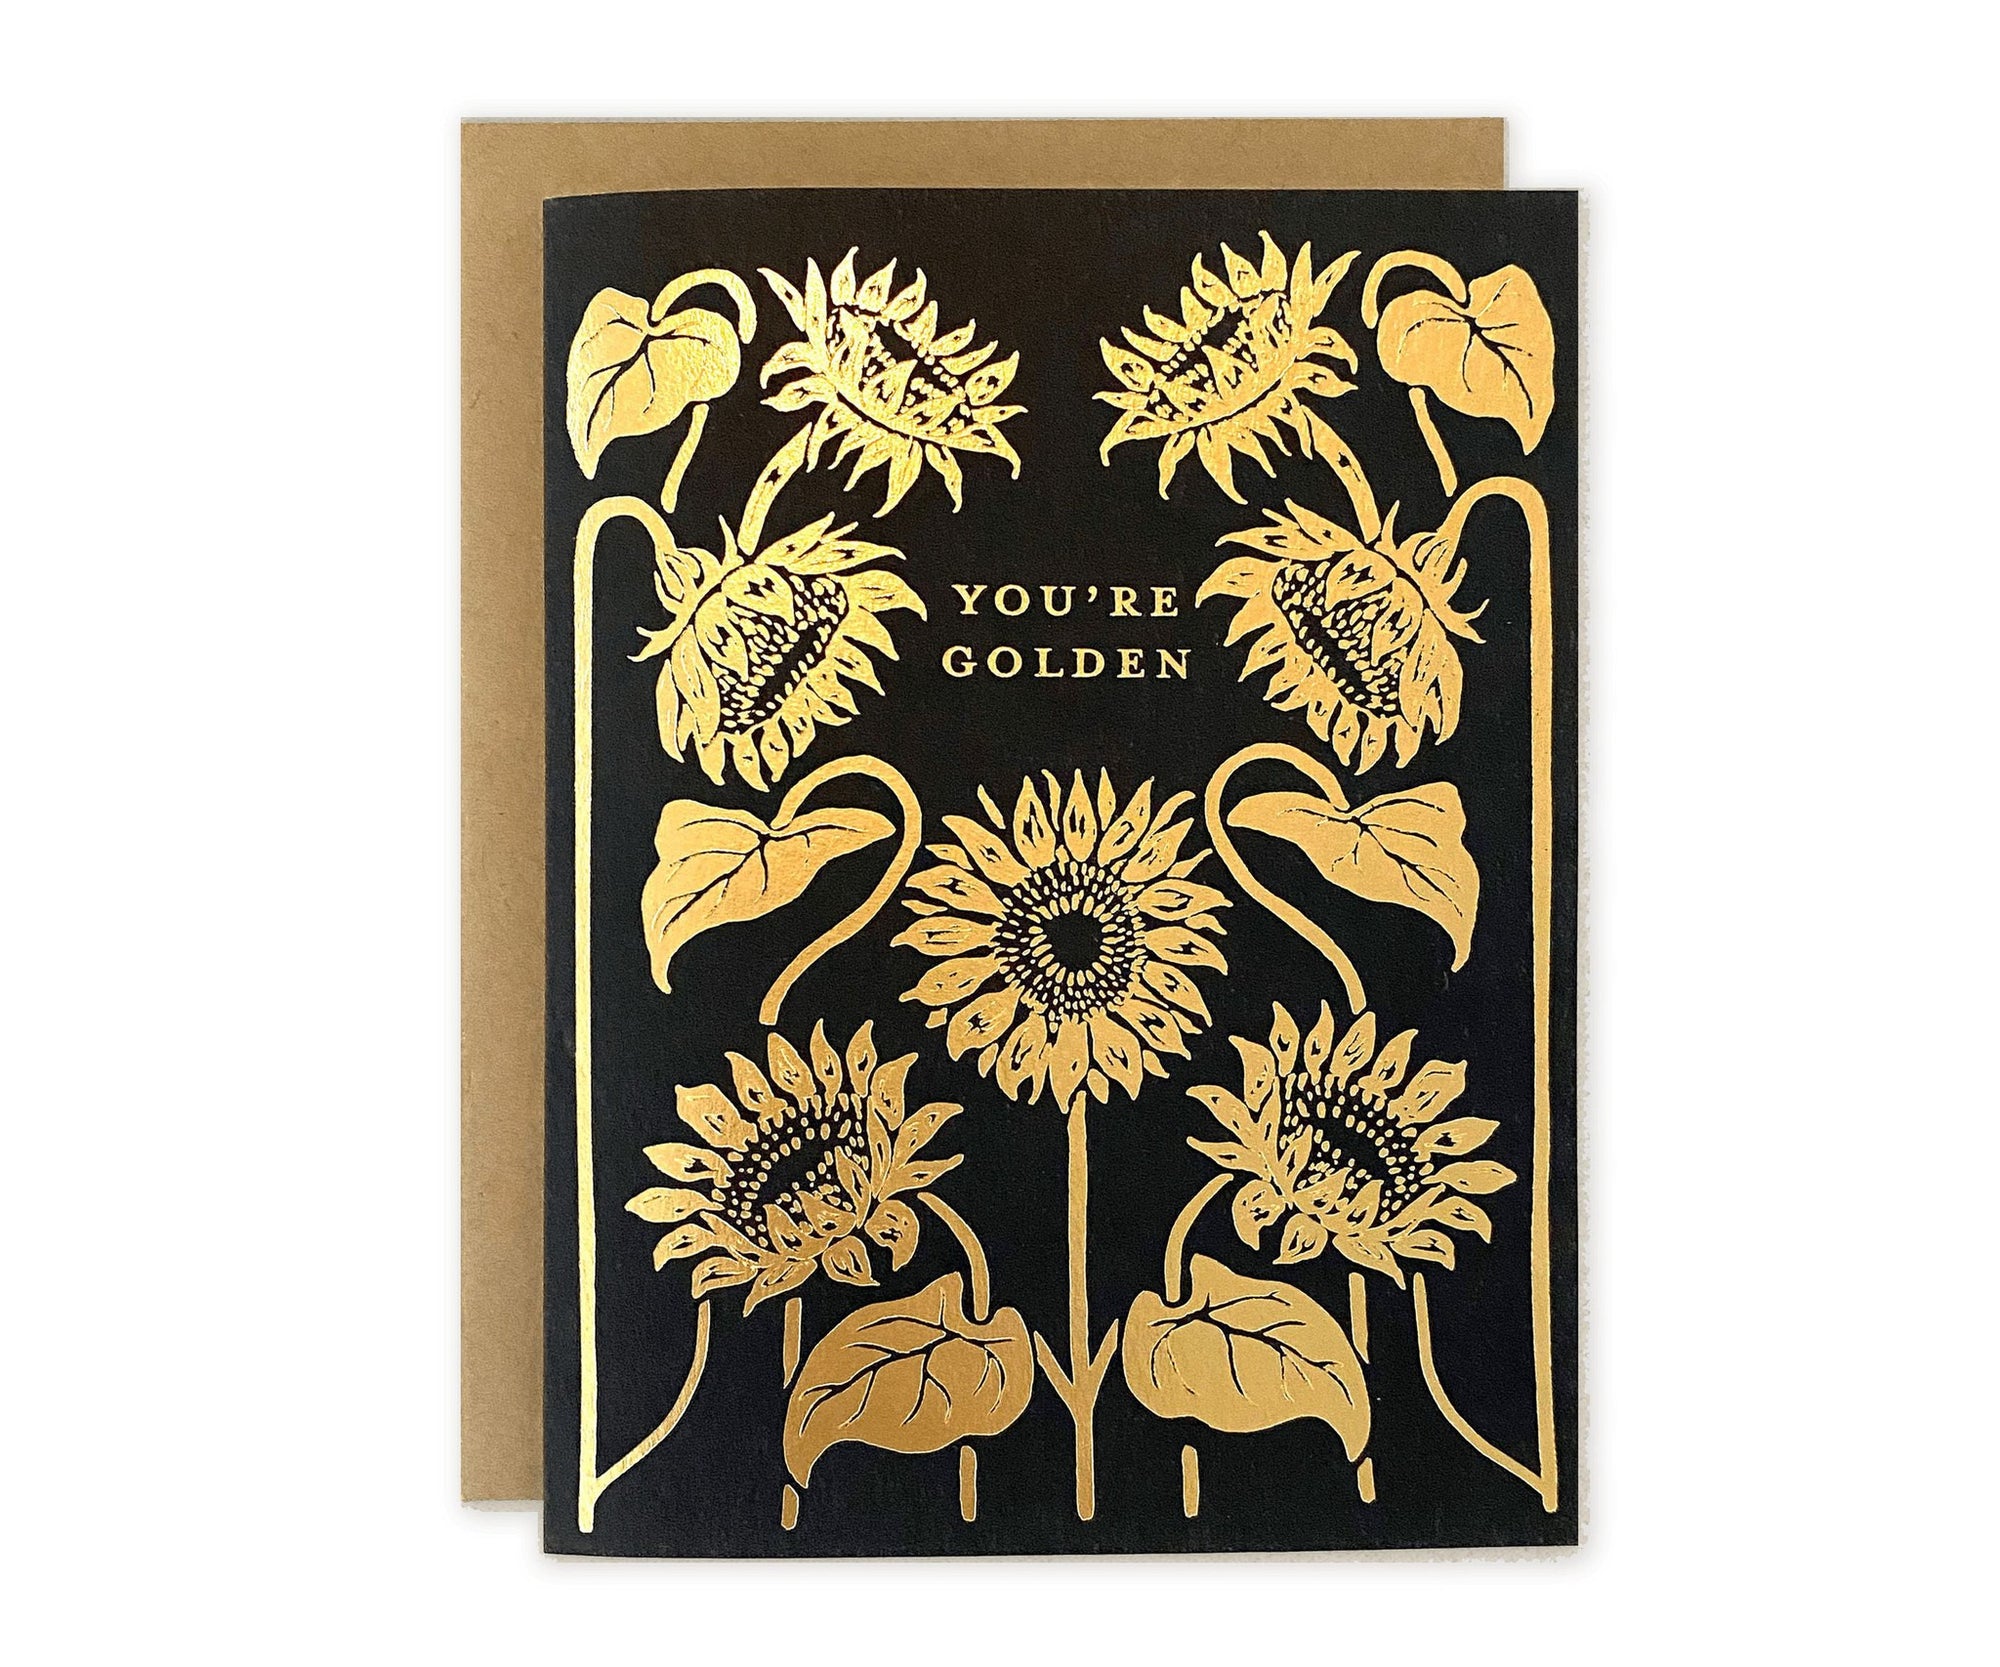 You're Golden Sunflower Greeting Card by The Wild Wander.